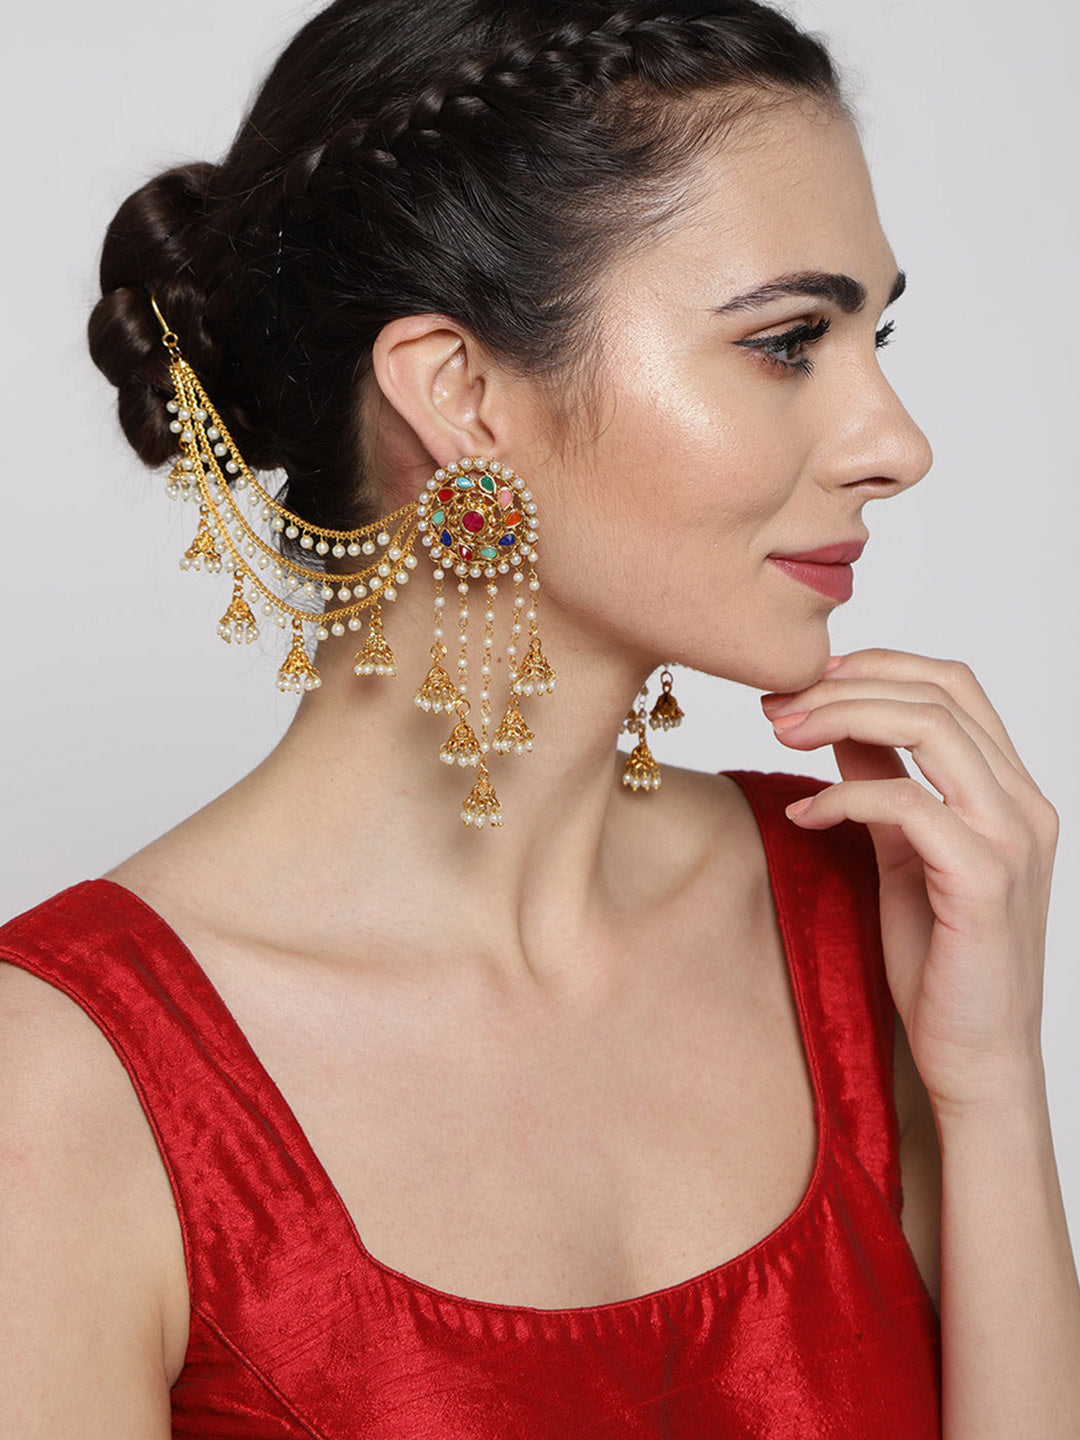 PANASH Earrings  Buy PANASH GoldPlated Pearl Beads Handcrafted Earrings  Chains Online  Nykaa Fashion